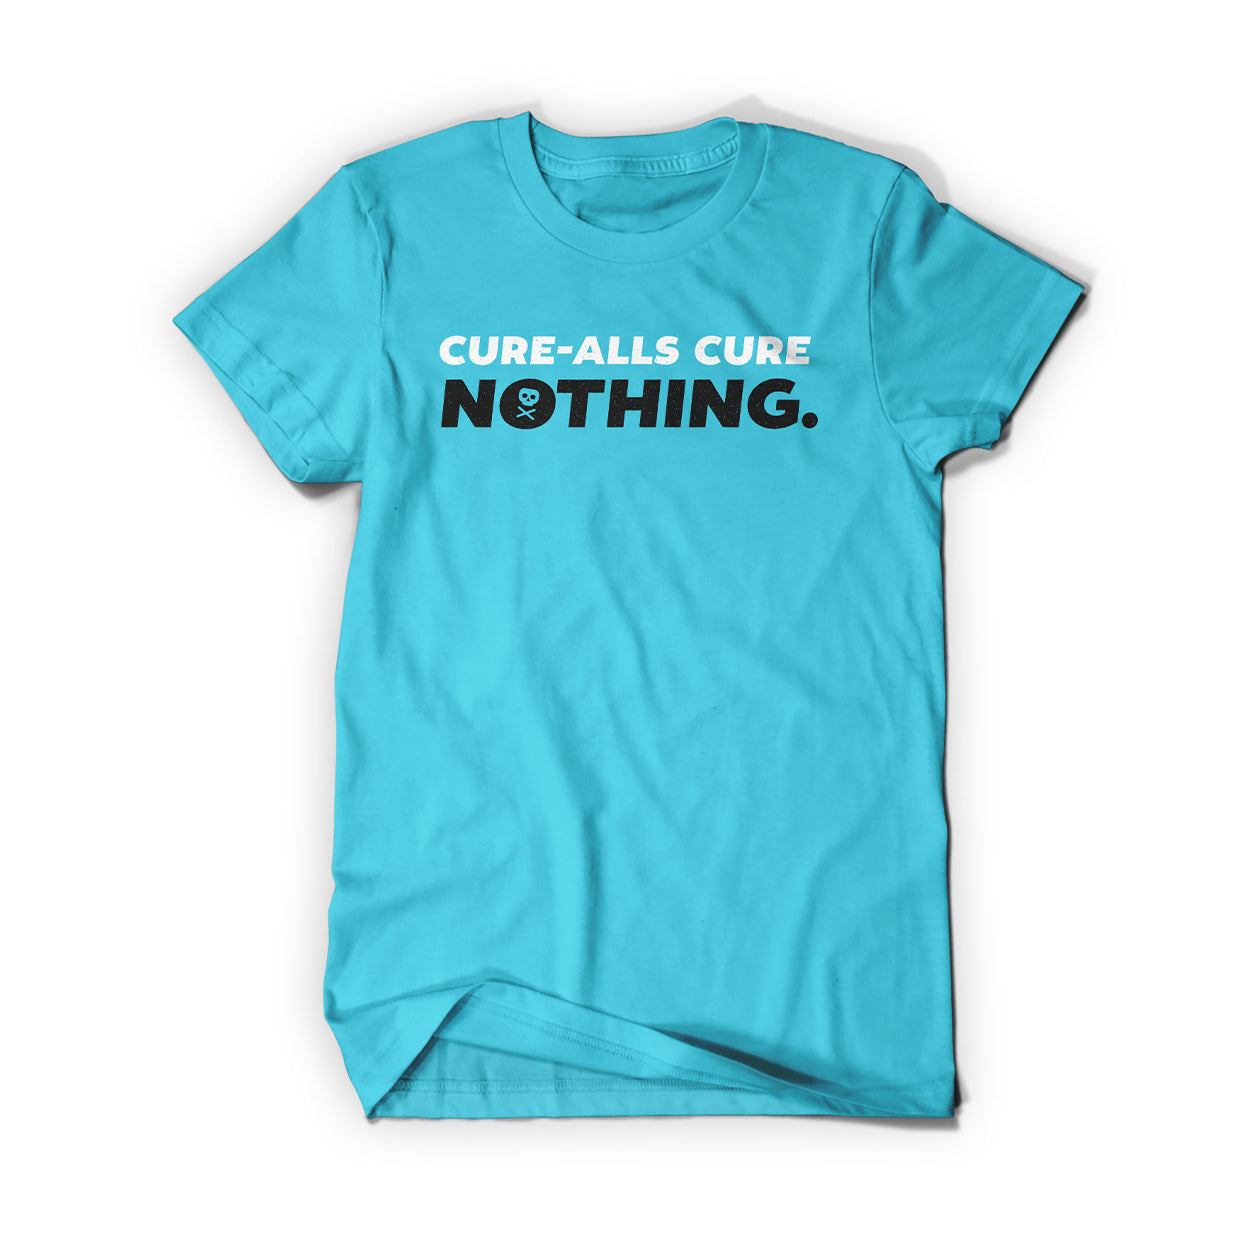 A bright blue tee-shirt that says, "Cure-alls cure" in white and "nothing" in black. The "O" in nothing has a skull and crossbones in it.